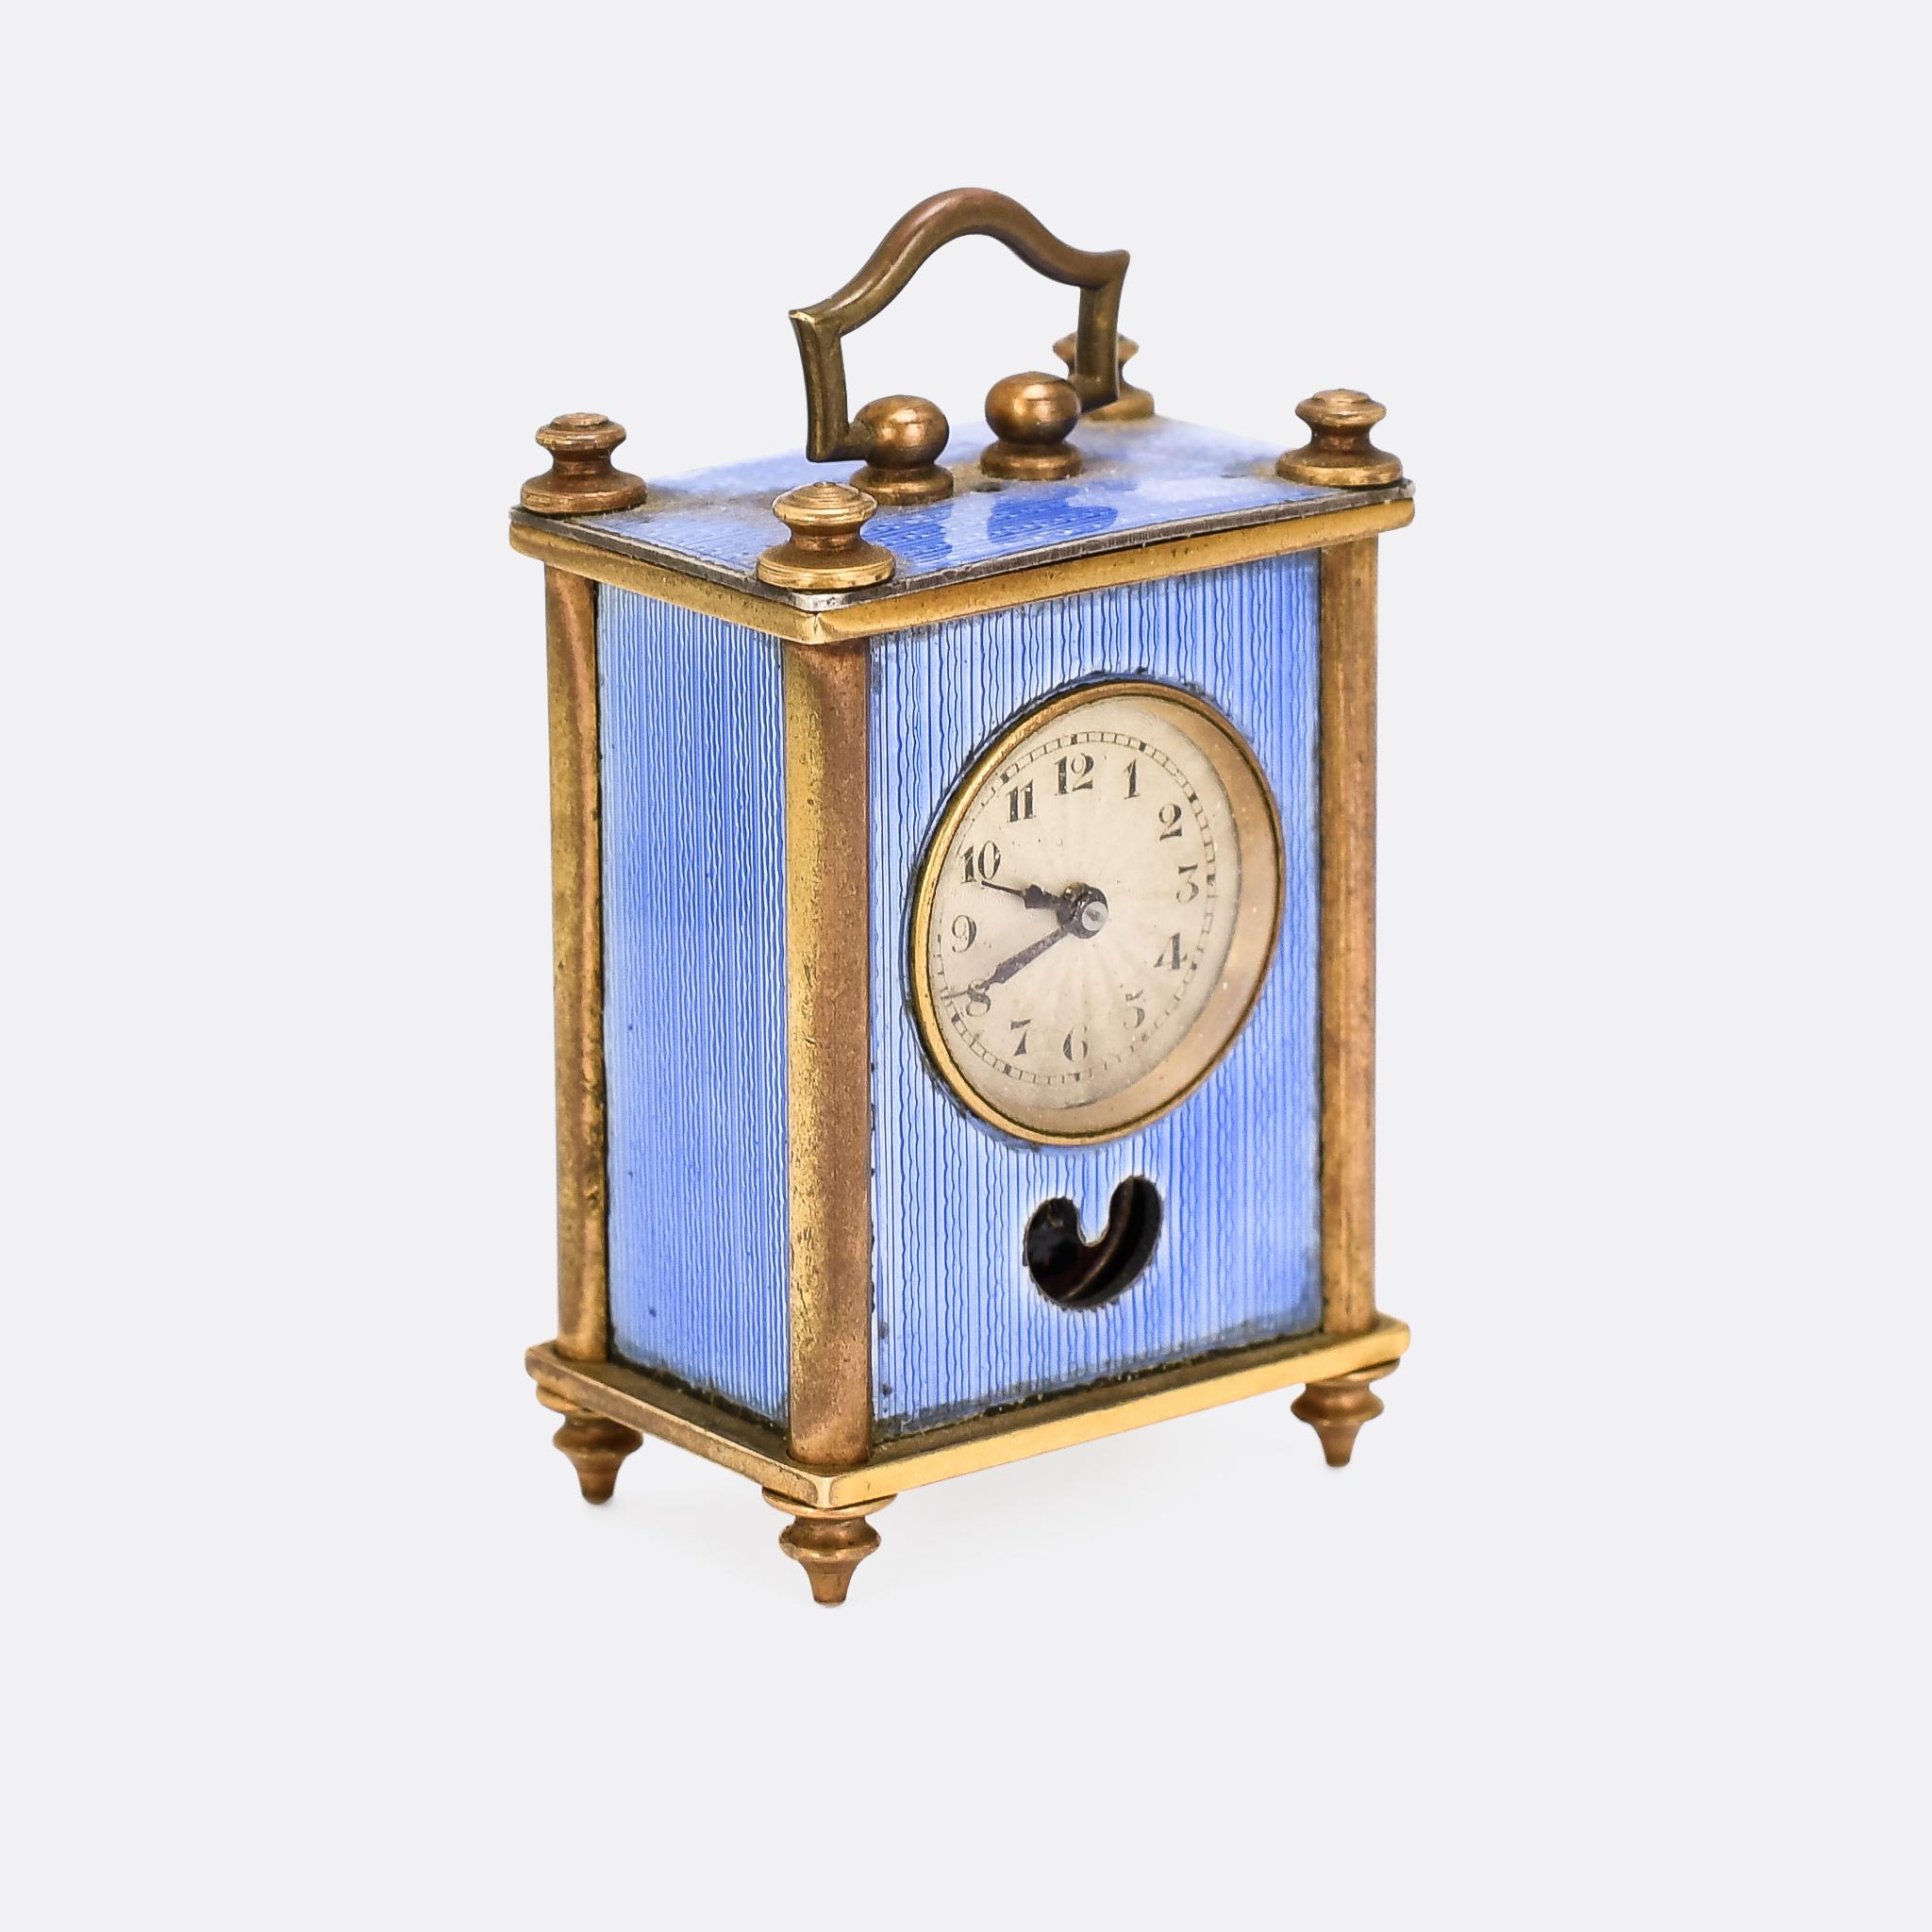 A remarkable (and tiny) miniature carriage clock dating from the early 20th century, circa 1920. It's made by Swiss clock maker, Theodore Jequier and features his patented Brevit #93017 movement. It's finished in light blue guilloché enamel and